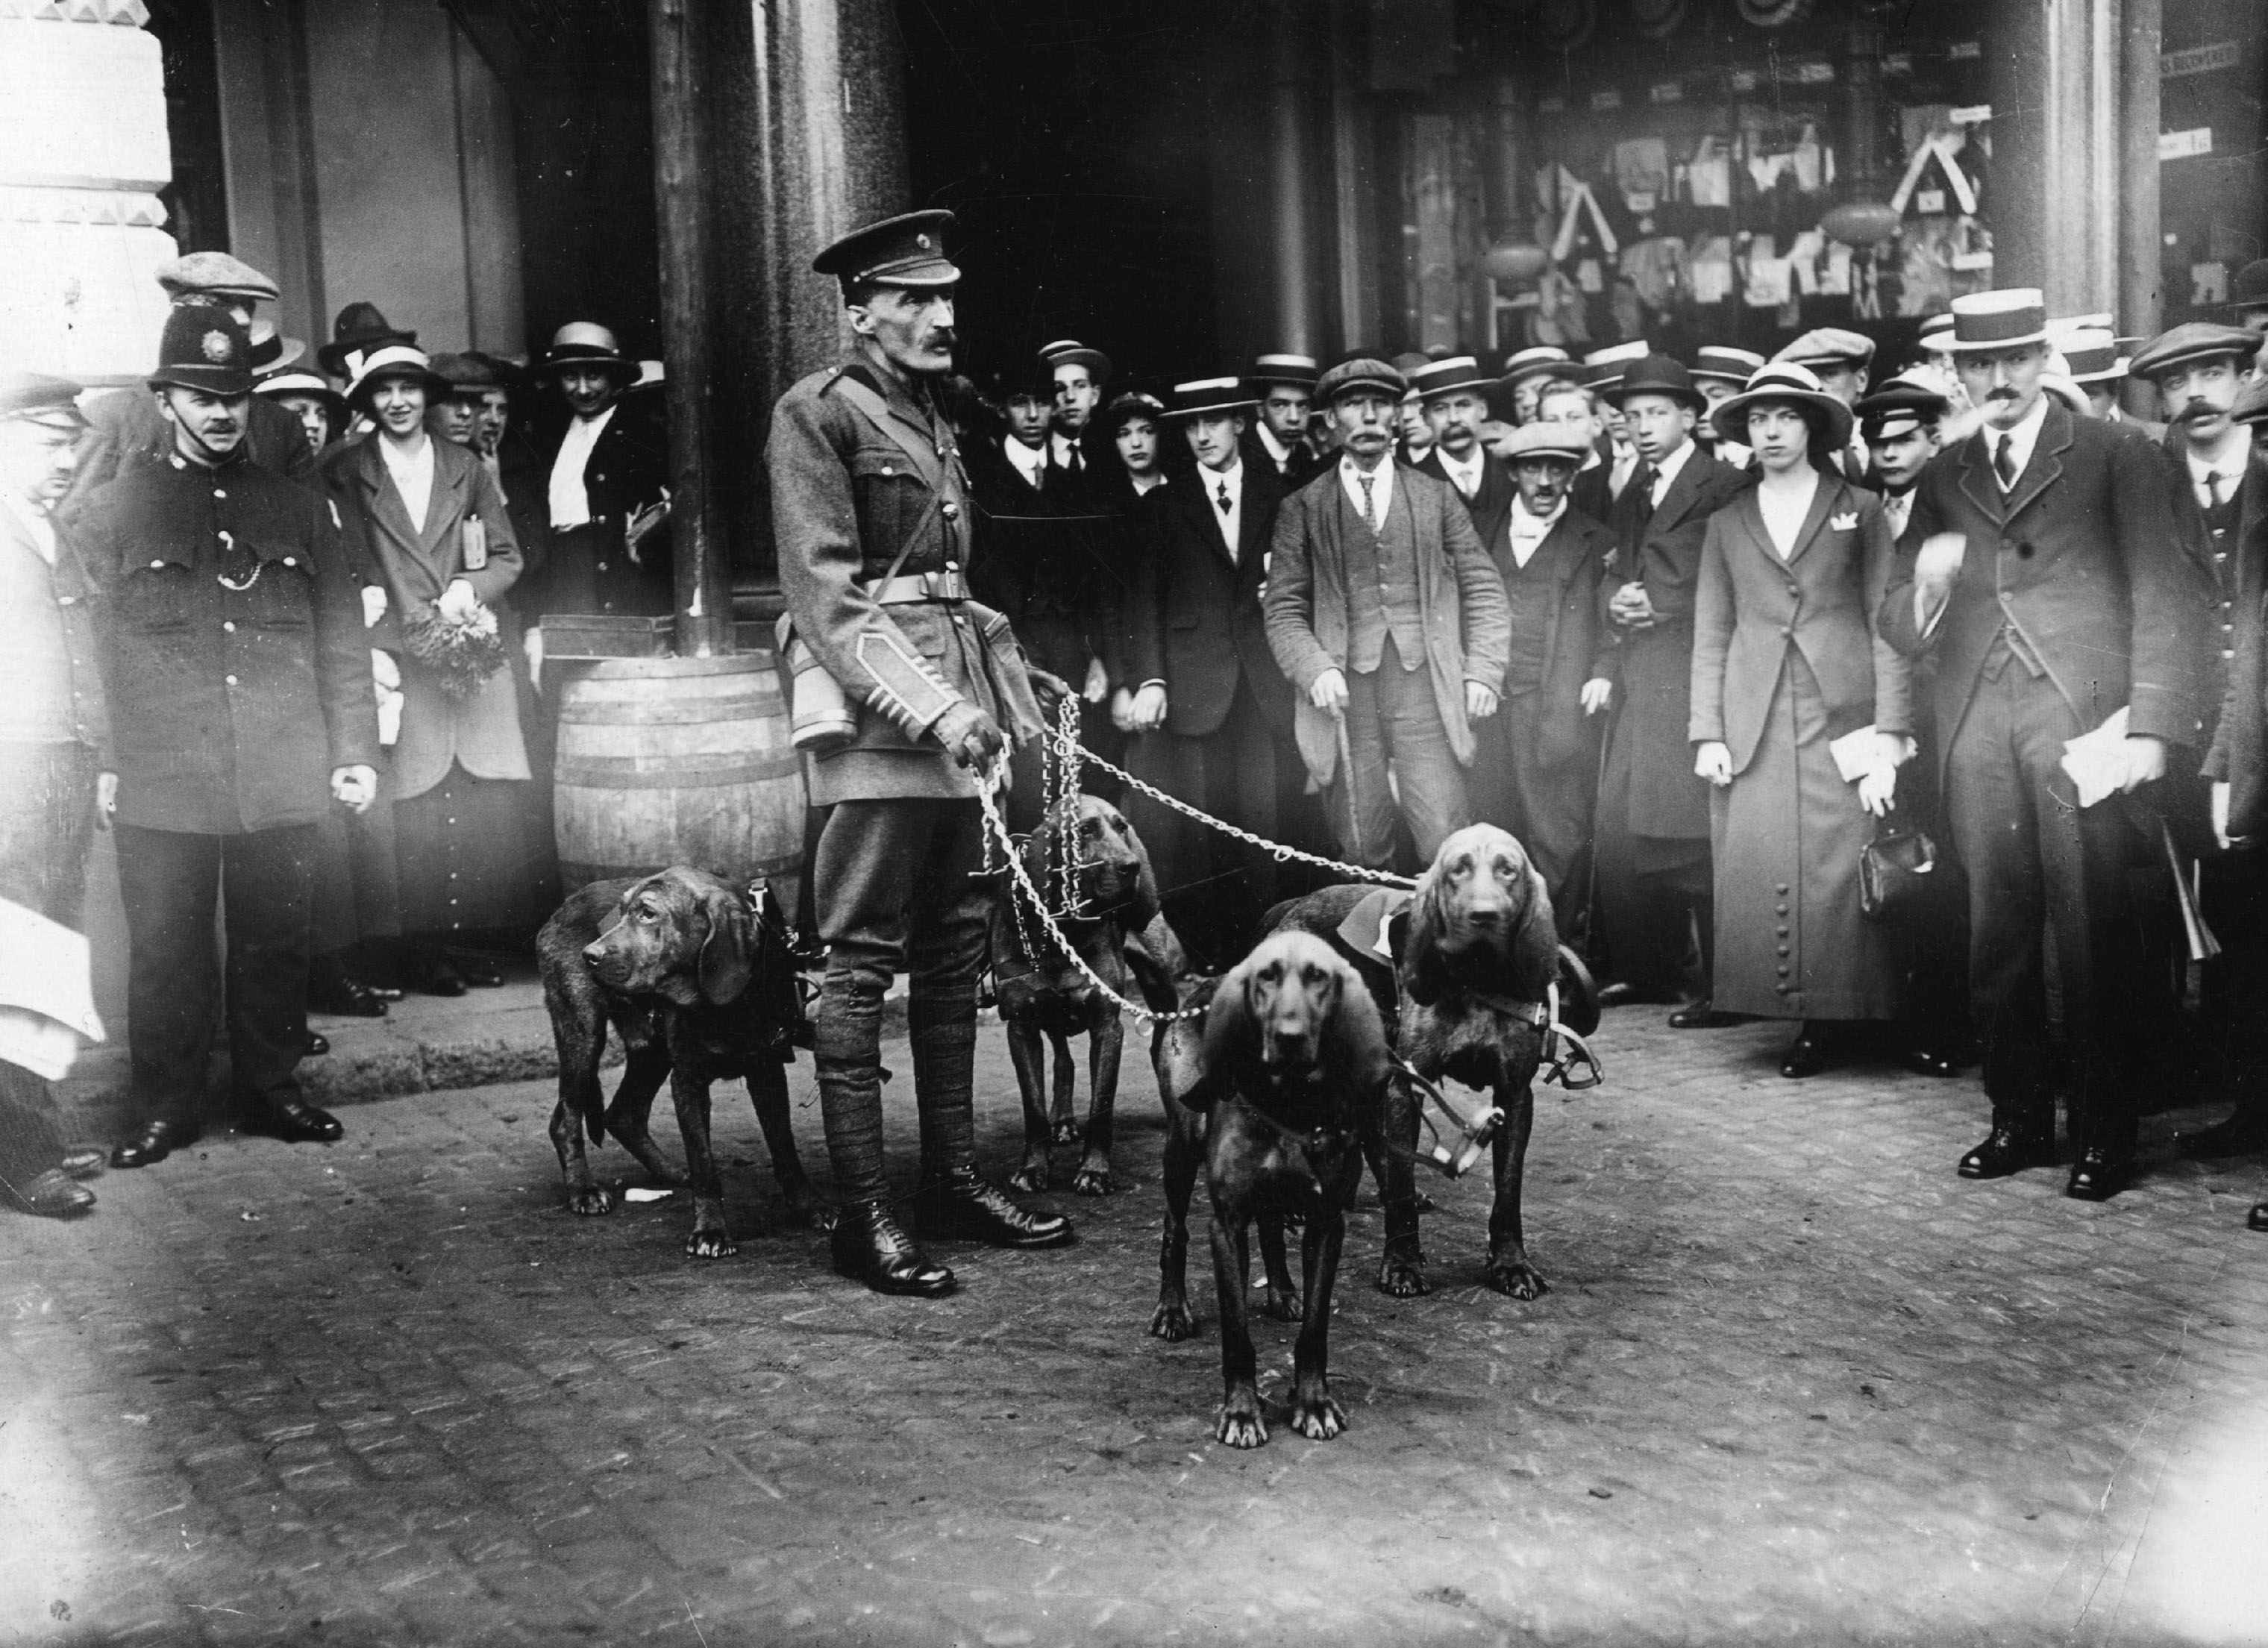 A crowd of onlookers watches Major Richardson with his bloodhounds in London on April 18,1914. They assisted the British Red Cross in locating wounded soldiers on the battlefields of World War I. (Hulton Archive—Getty Images)